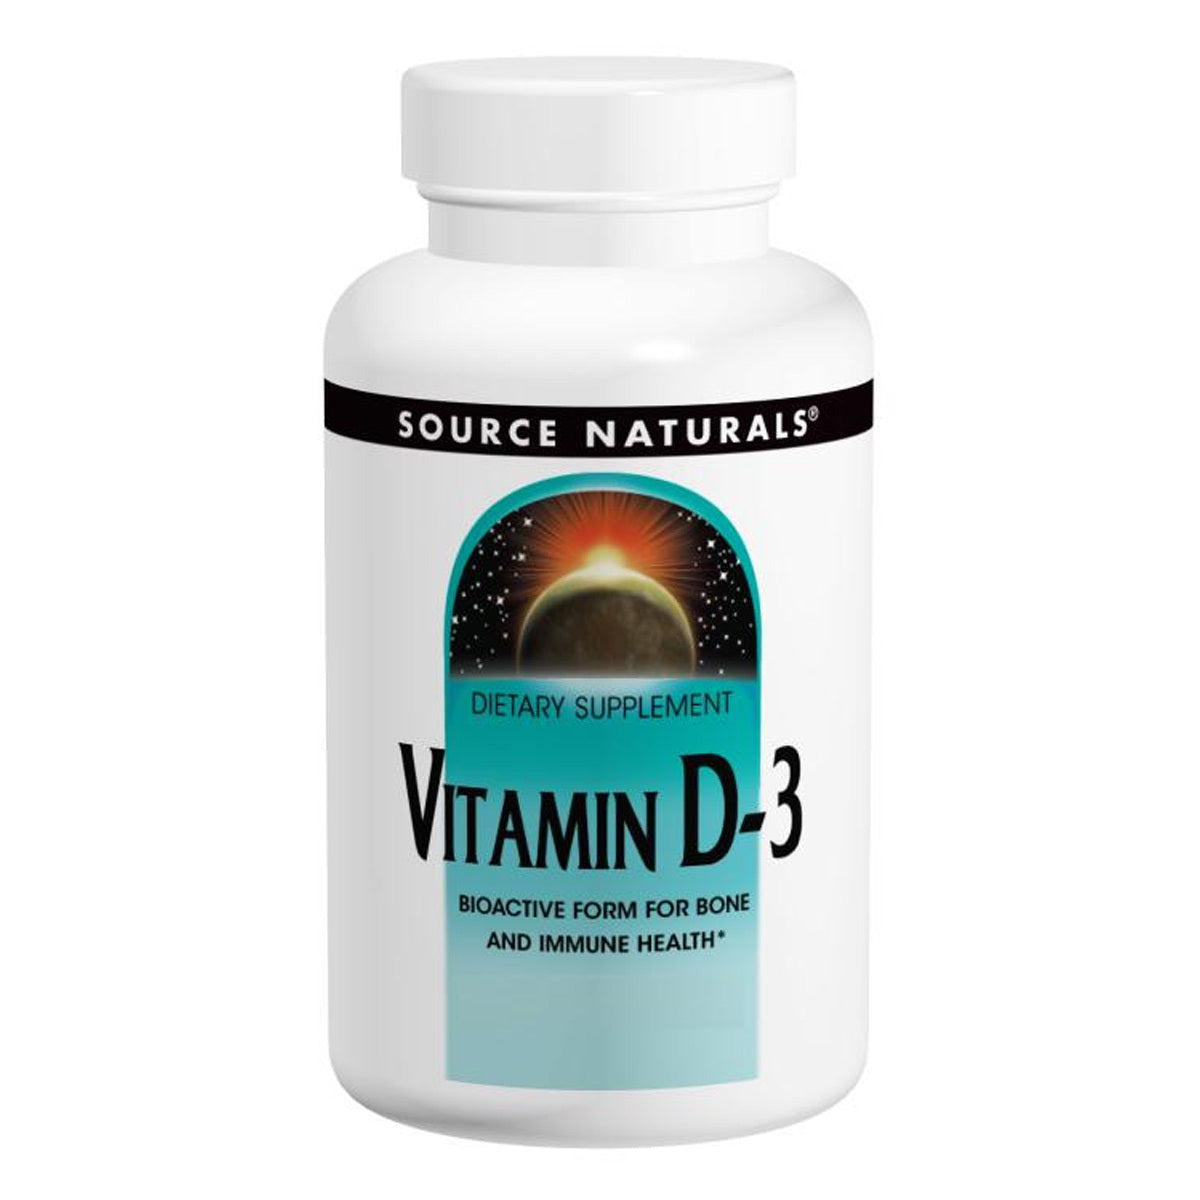 Primary image of Vitamin D-3